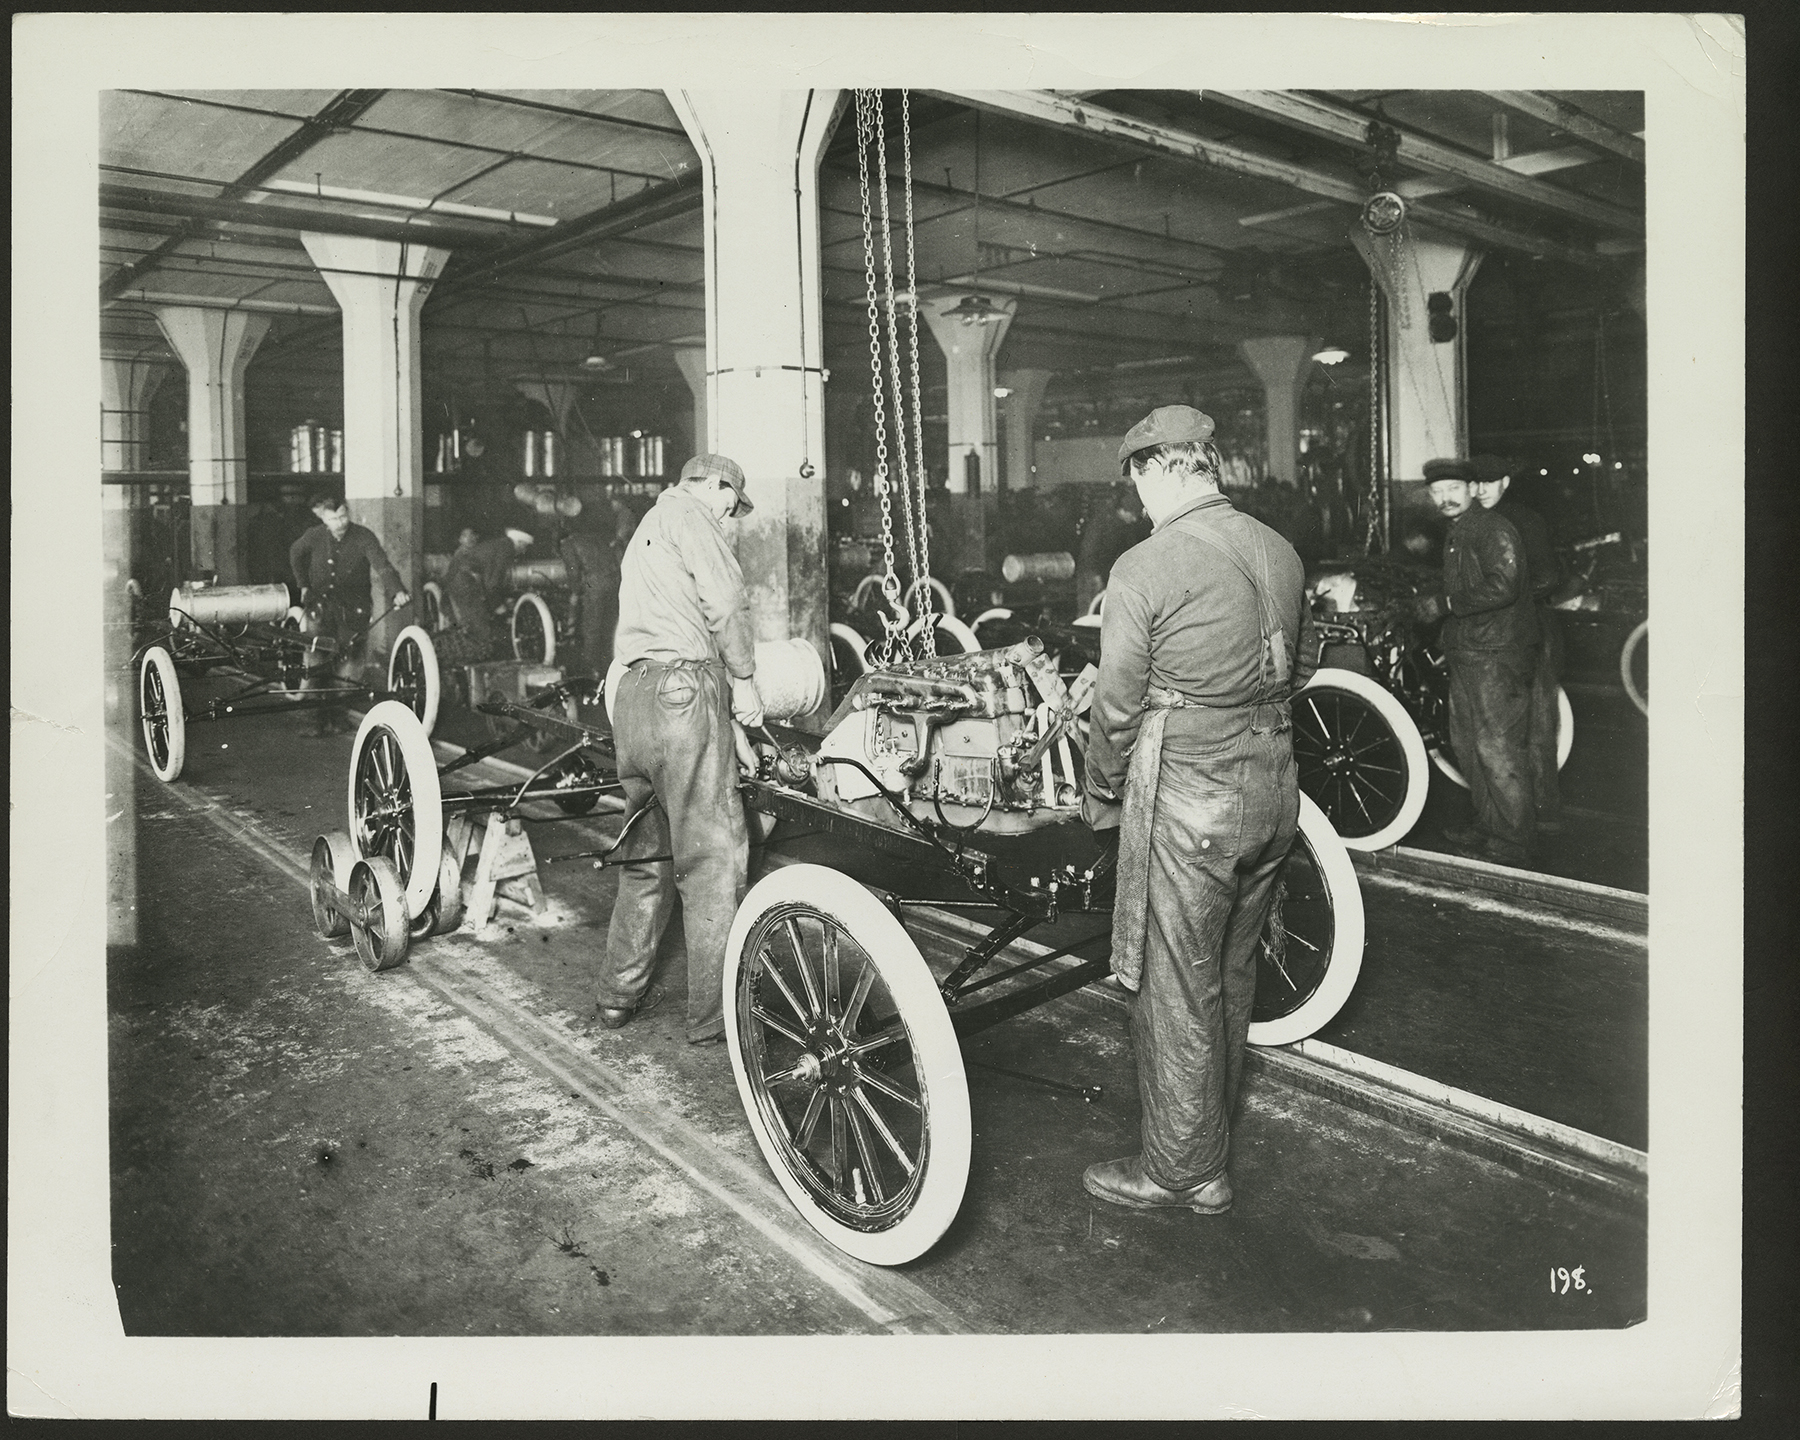 Assembly workers at the Ford Motor Co. Assembly Plant in Pittsburgh in 1913. (Courtesy of The Henry Ford)